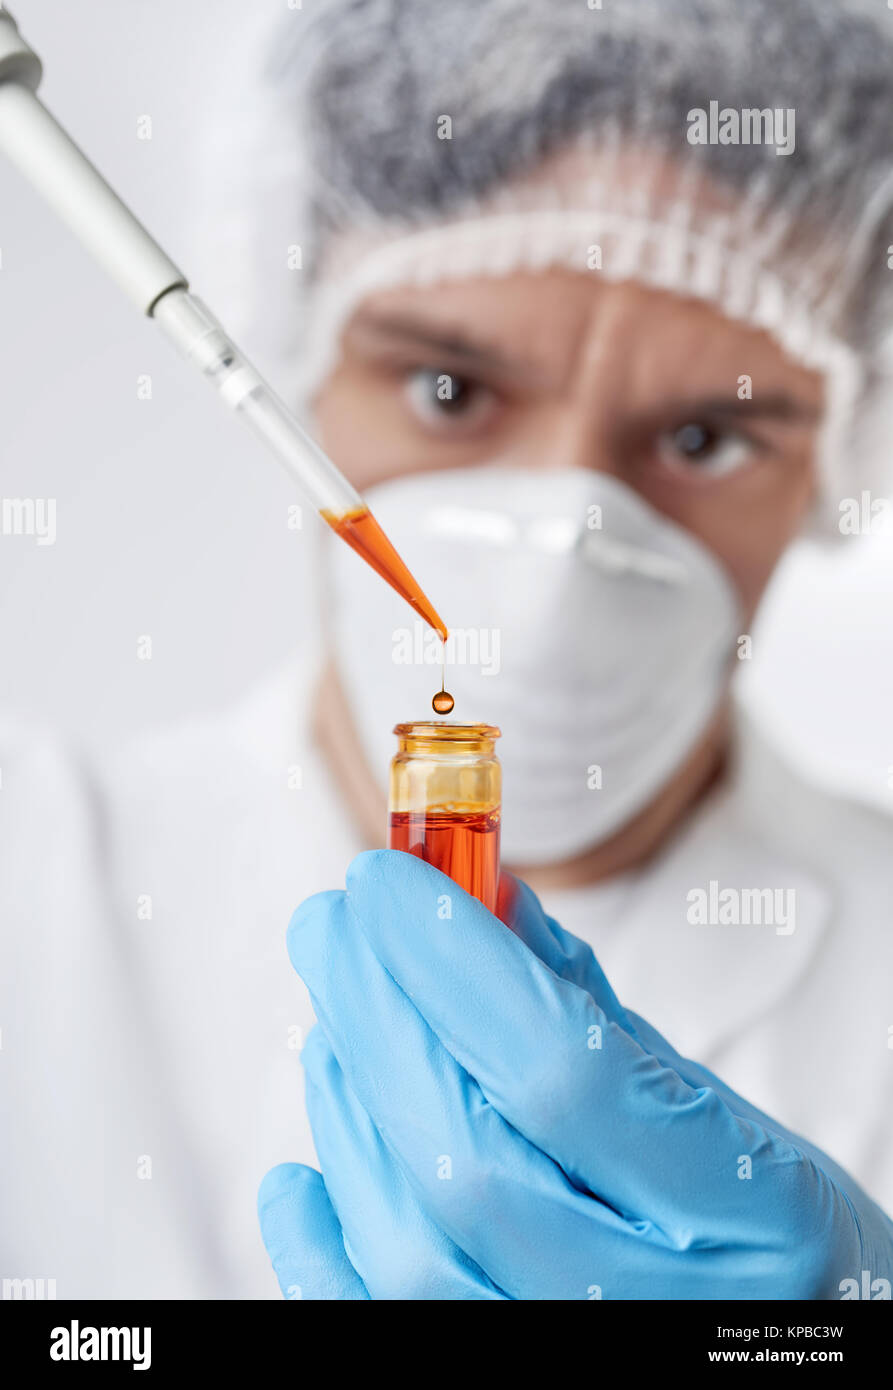 Keen scientist with brown eyes in protective wear pipettes orange sample Stock Photo